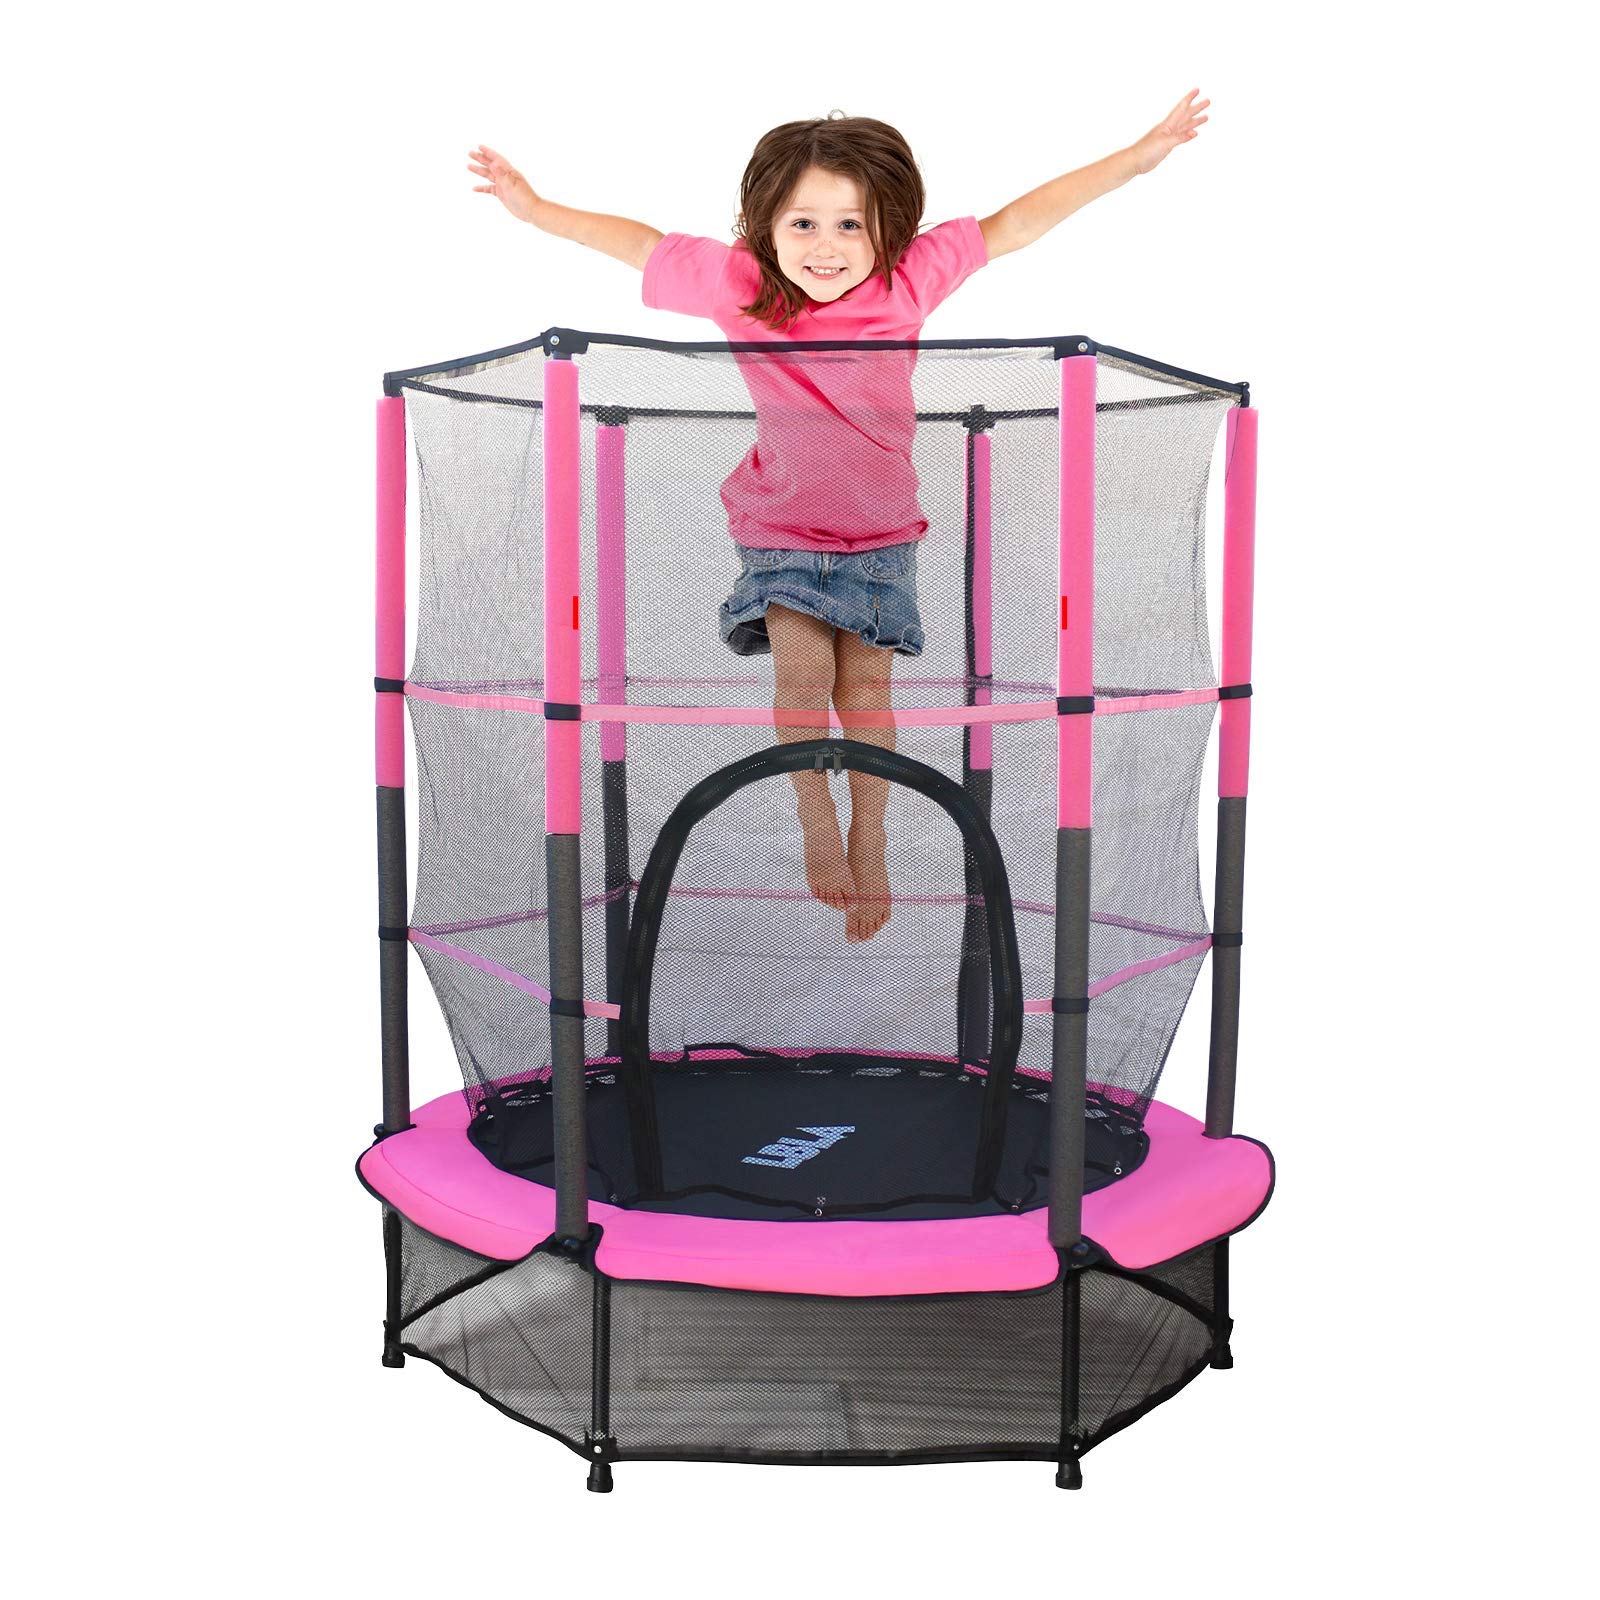 Kids Trampoline, 55” Mini Trampoline for Kids with Enclosure Net and Safety Pad, Heavy Duty Frame Round Trampoline with Built-in Zipper for Indoor Outdoor Featured Image